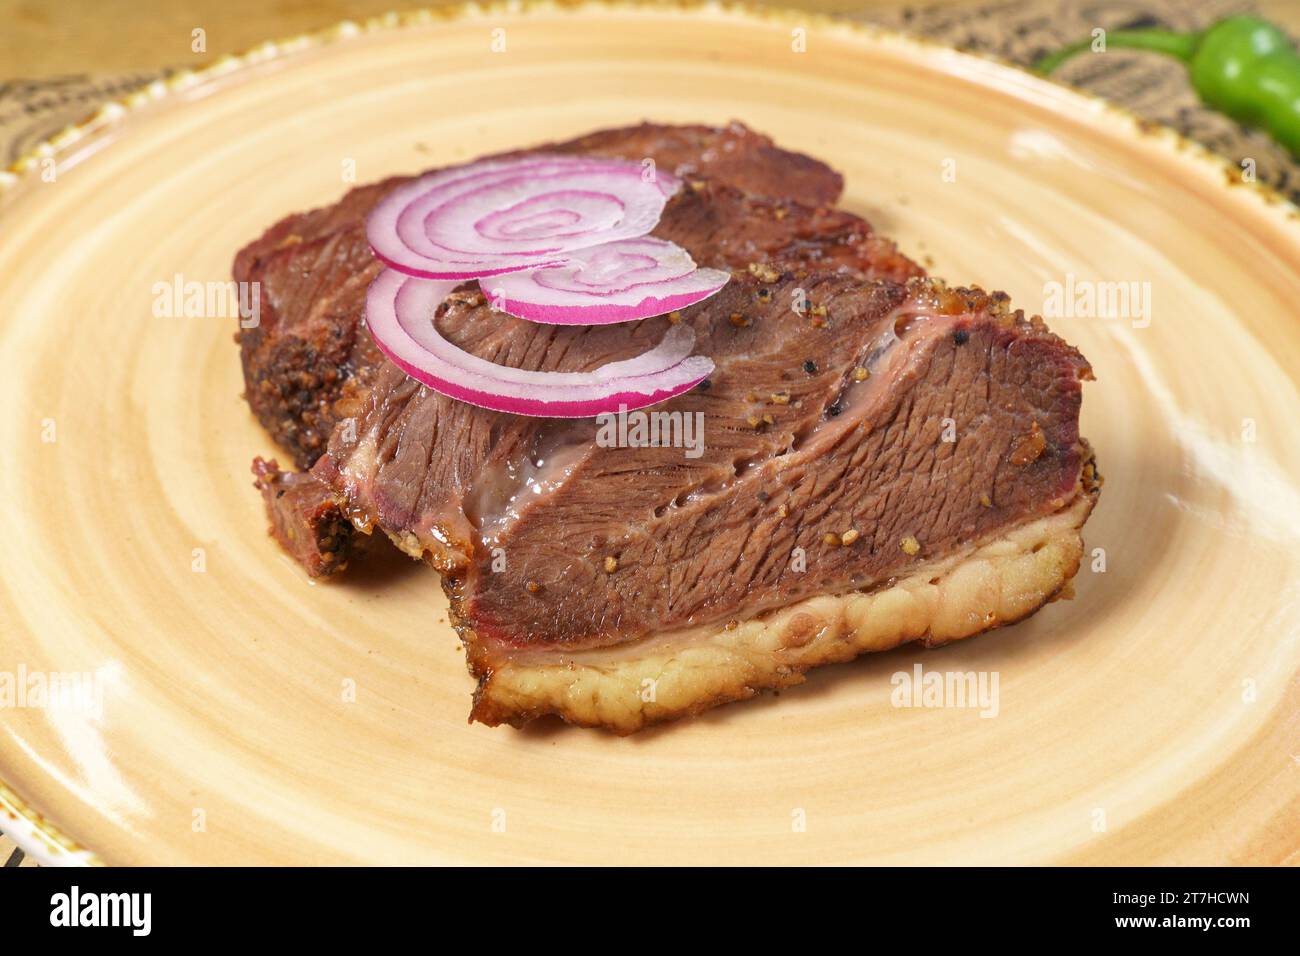 Beef steak close-up with onions. Concept of tasty food. Serving dishes in the restaurant Stock Photo